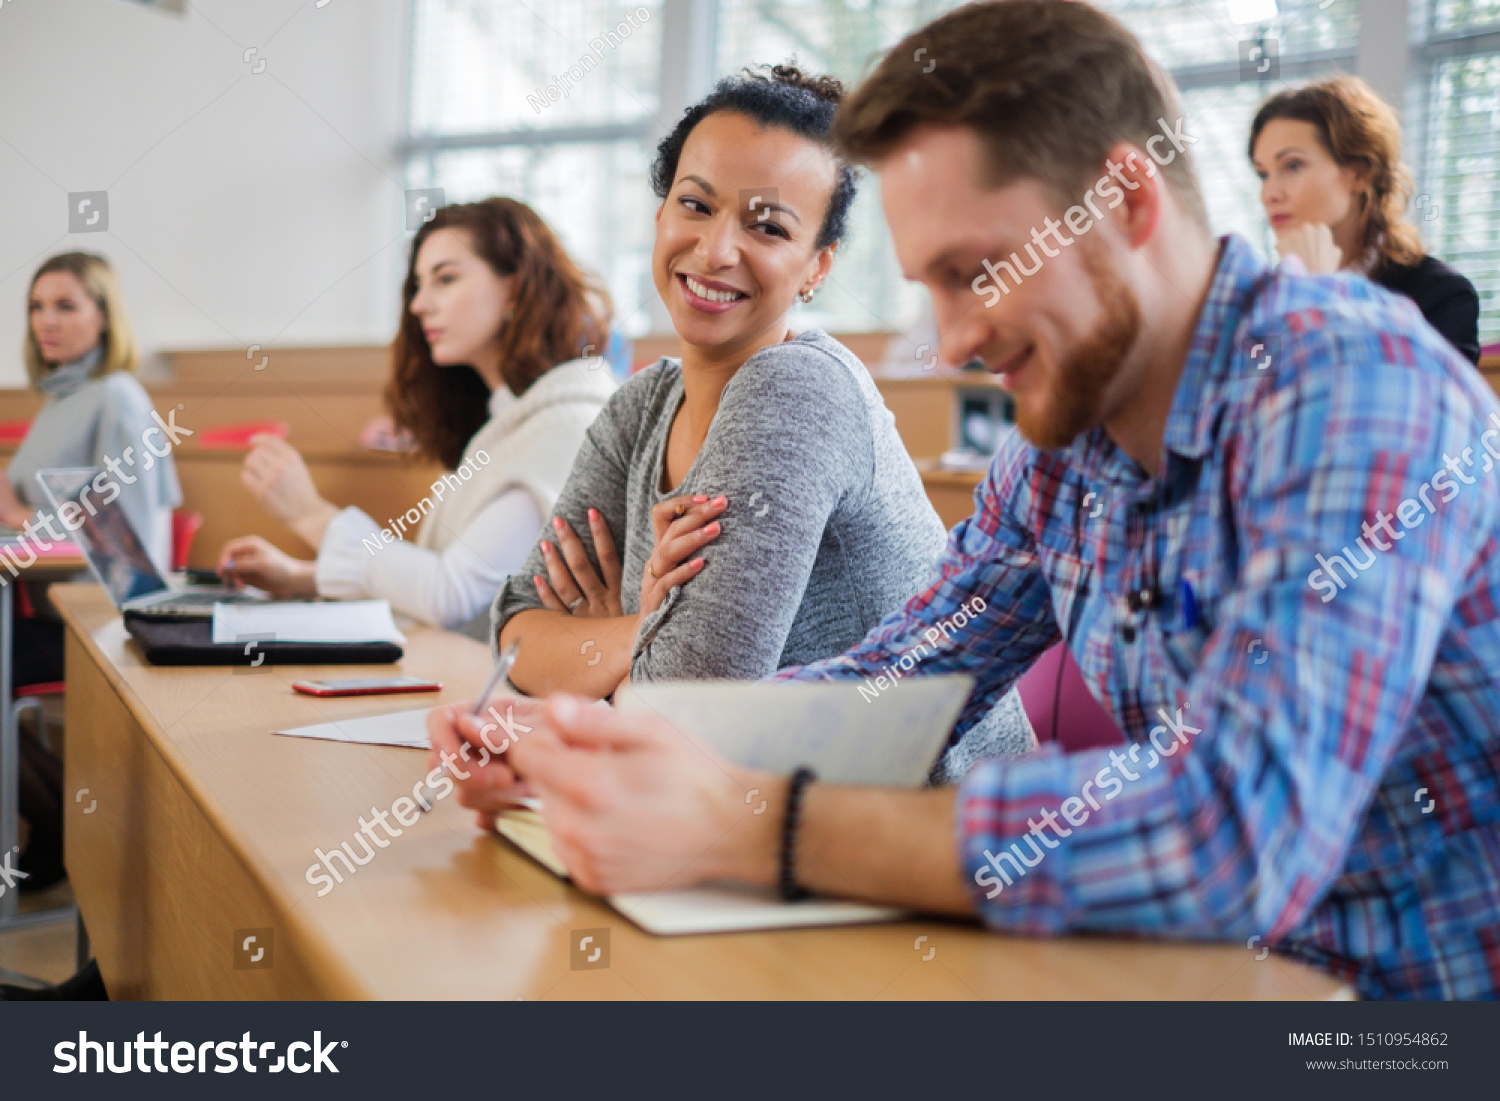 Multinational group of students in an auditorium #1510954862